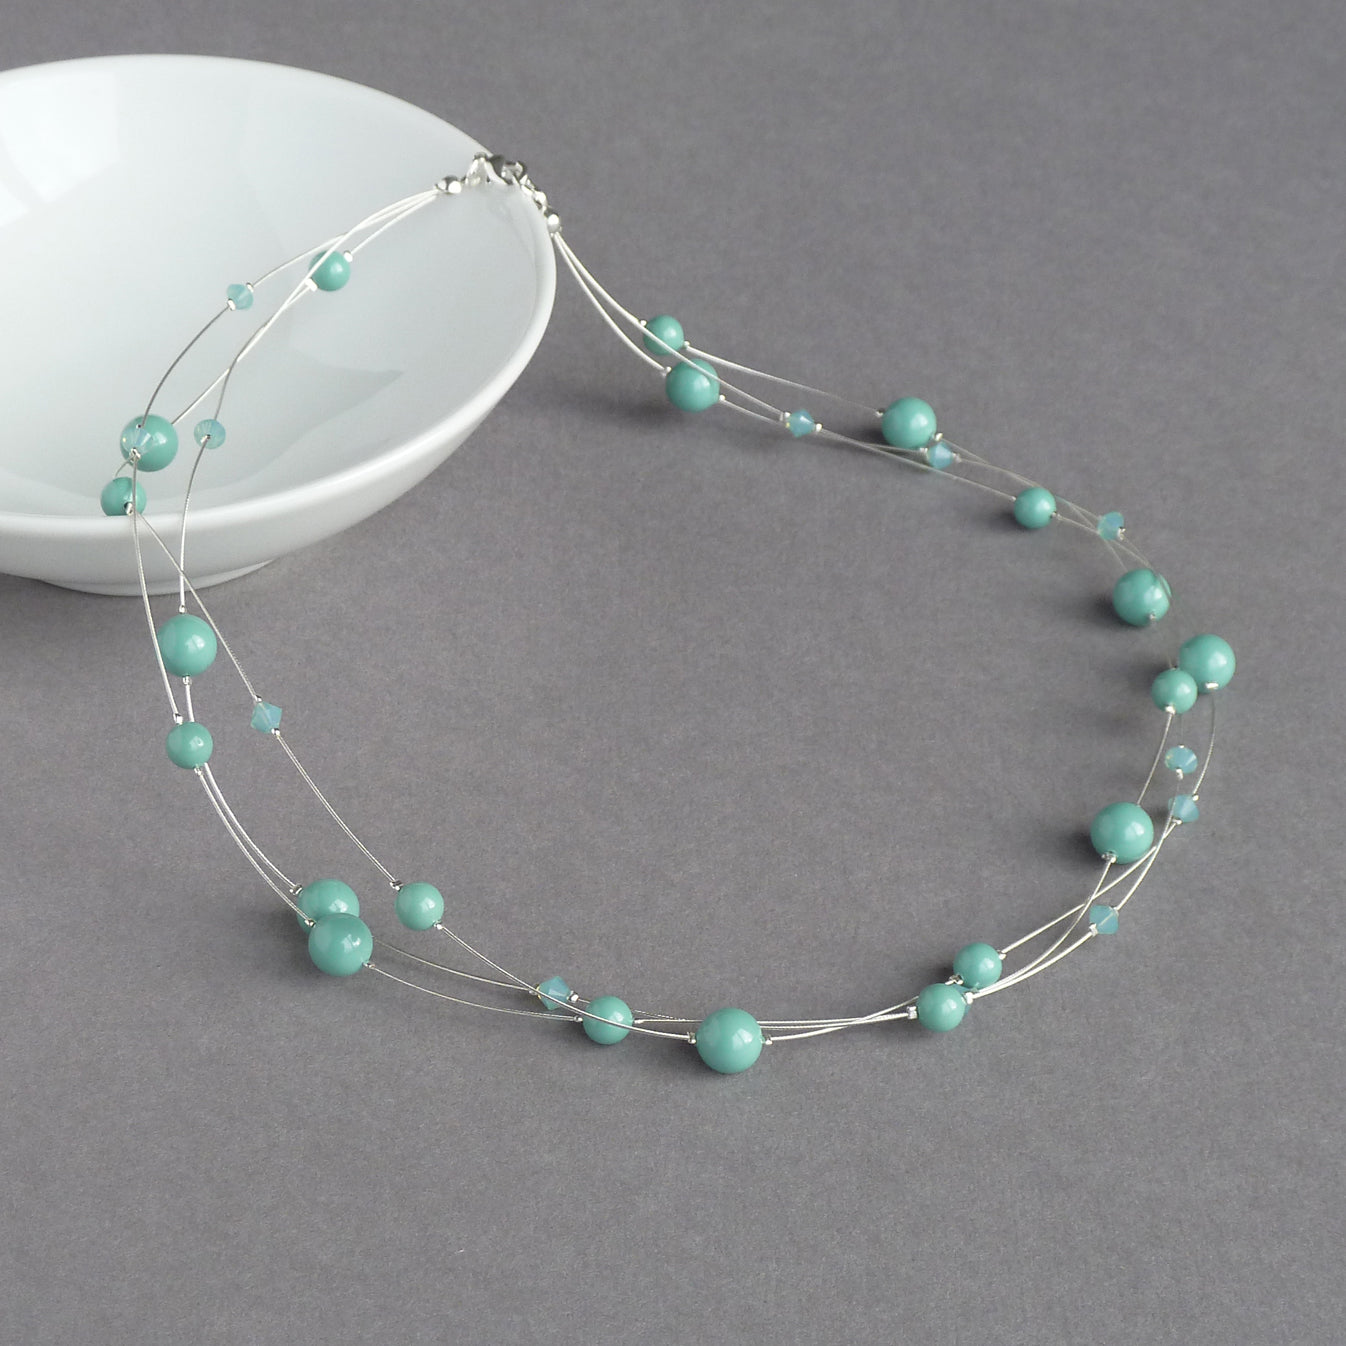 Pale teal floating pearl necklace